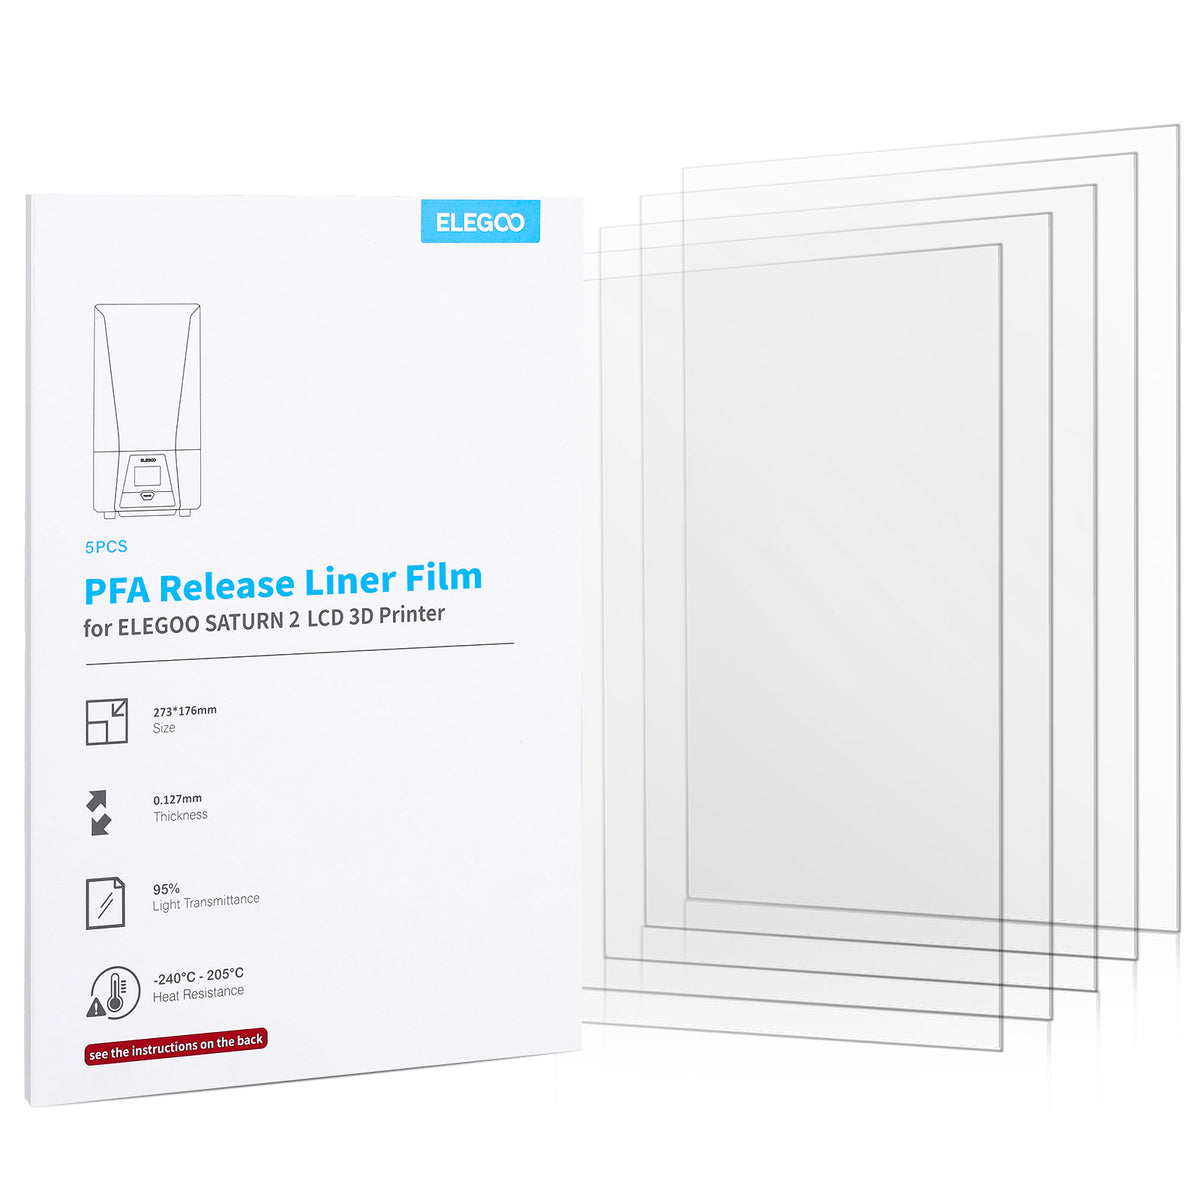 ELEGOO PFA Release Liner Film for Saturn 2 and Saturn 8K, 5 Pieces